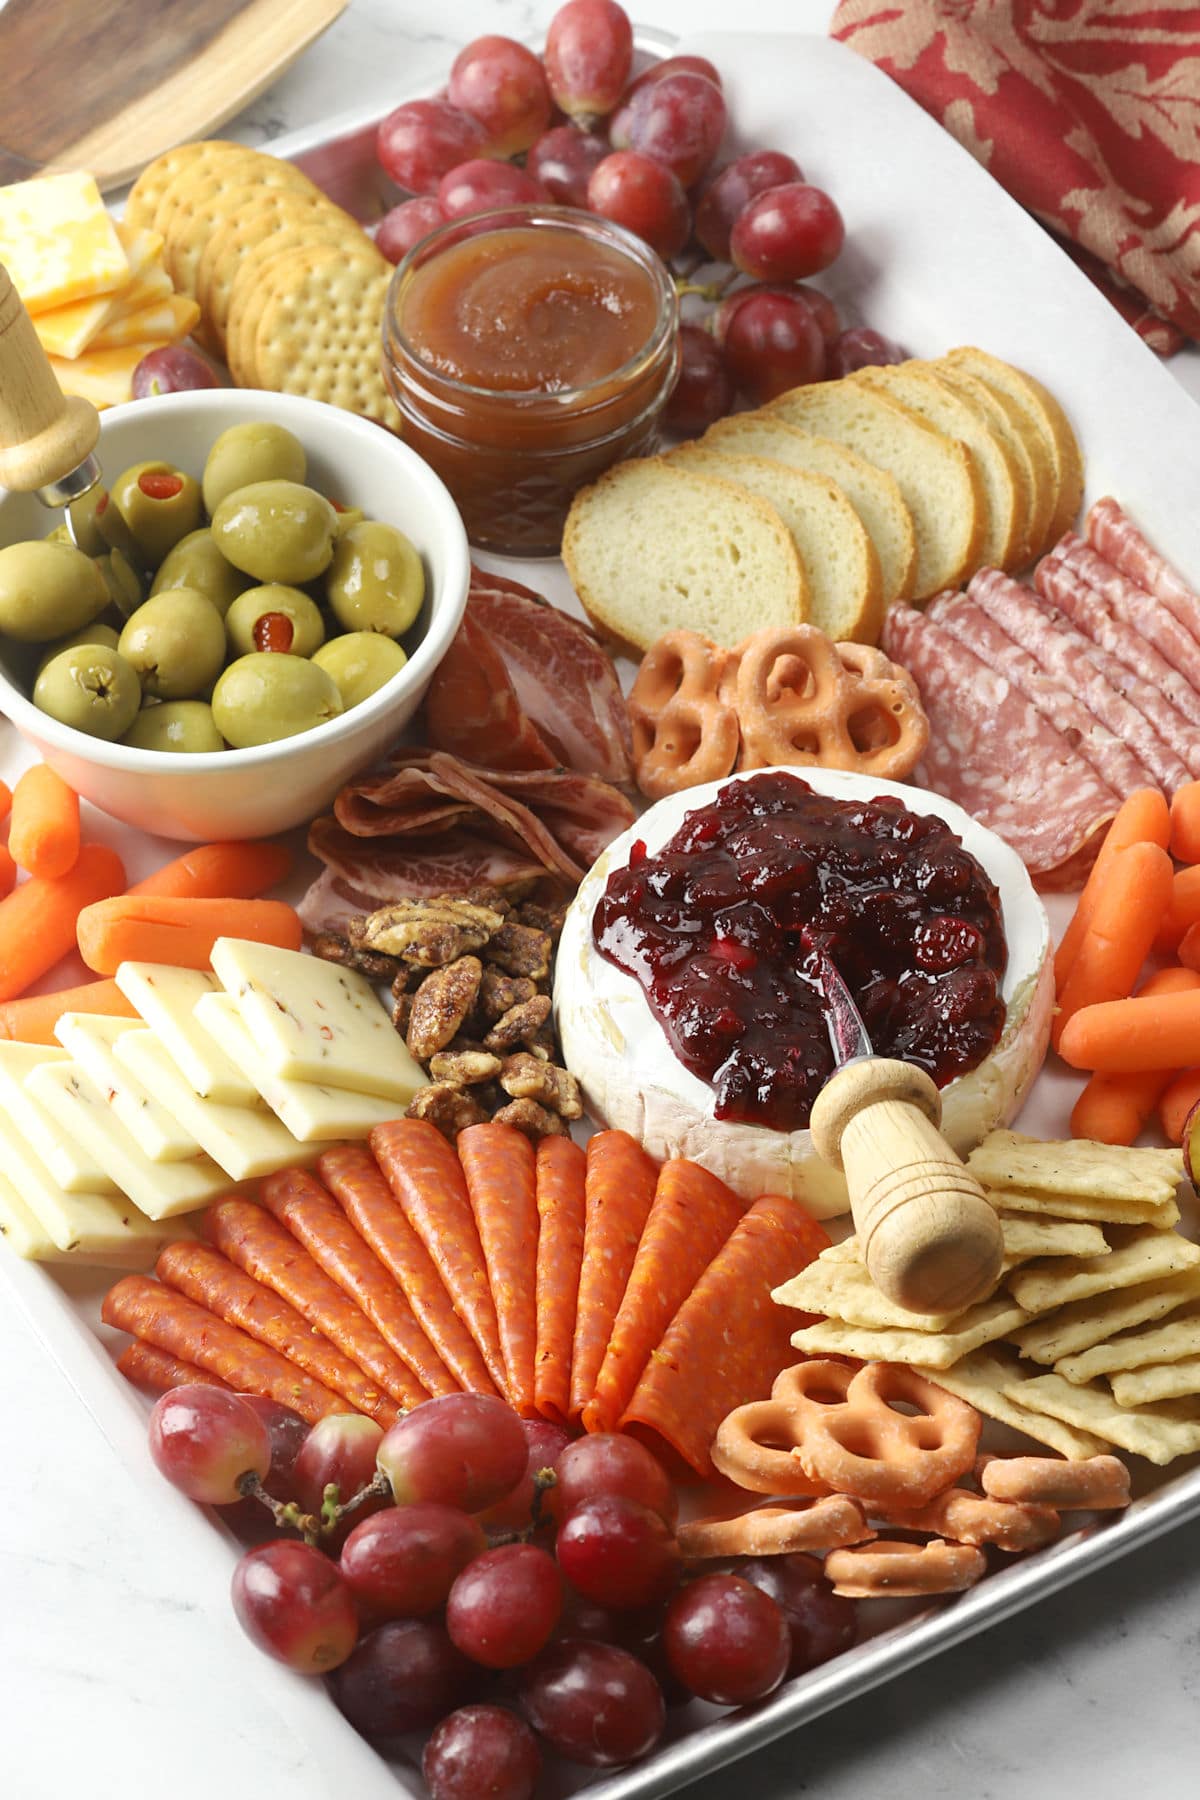 Meats and cheeses assembled onto a tray.